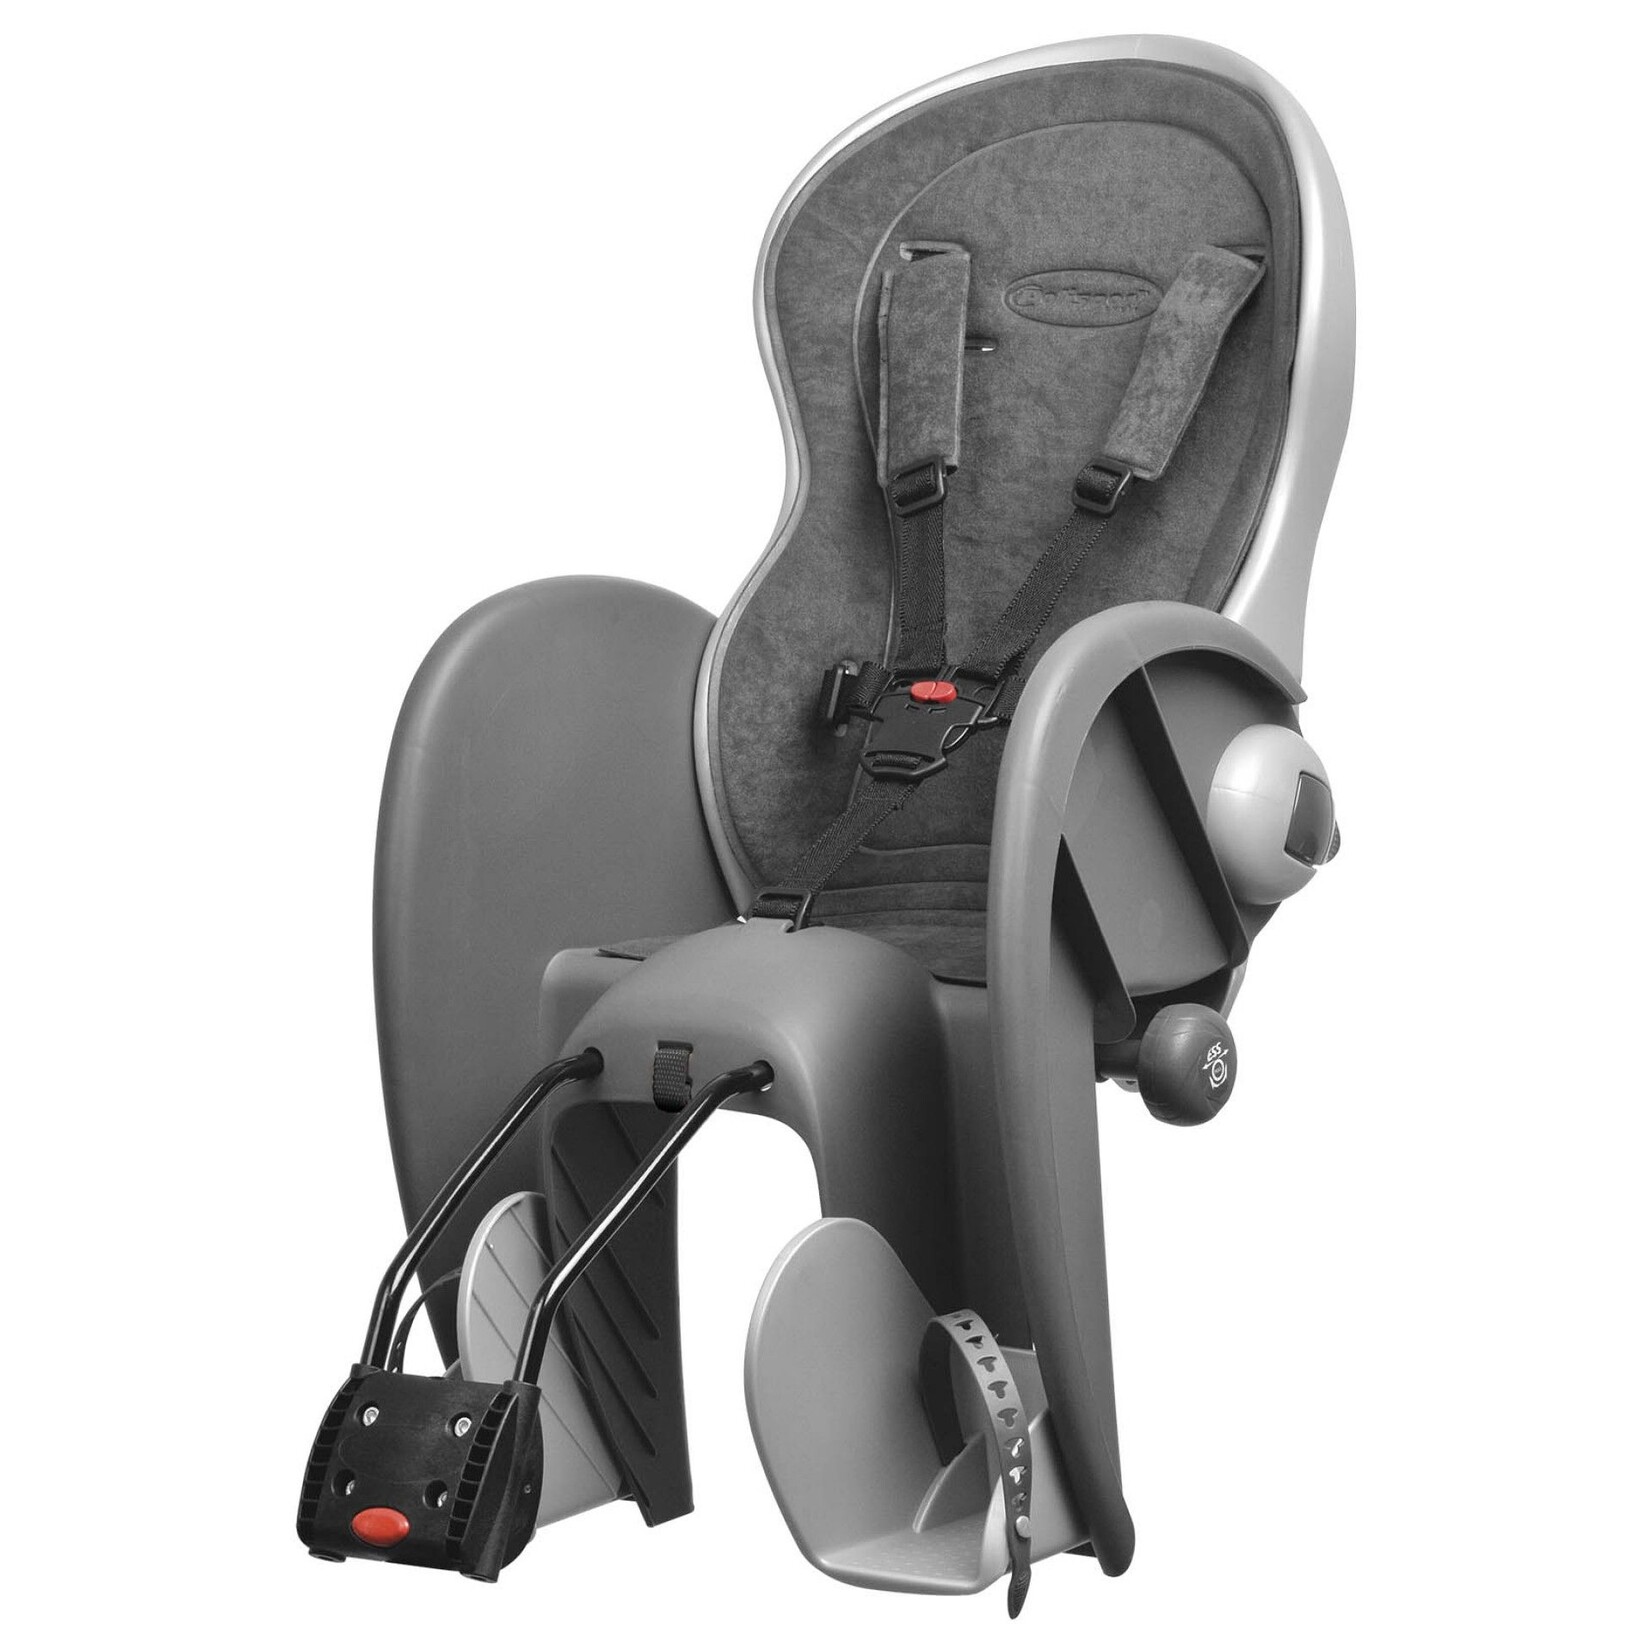 PoliSport BABY SEAT - Polisport Wallaby, Deluxe, Q/R, 5 Point Adjustable Safety Harness, Easy Assemble, GREY/SILVER